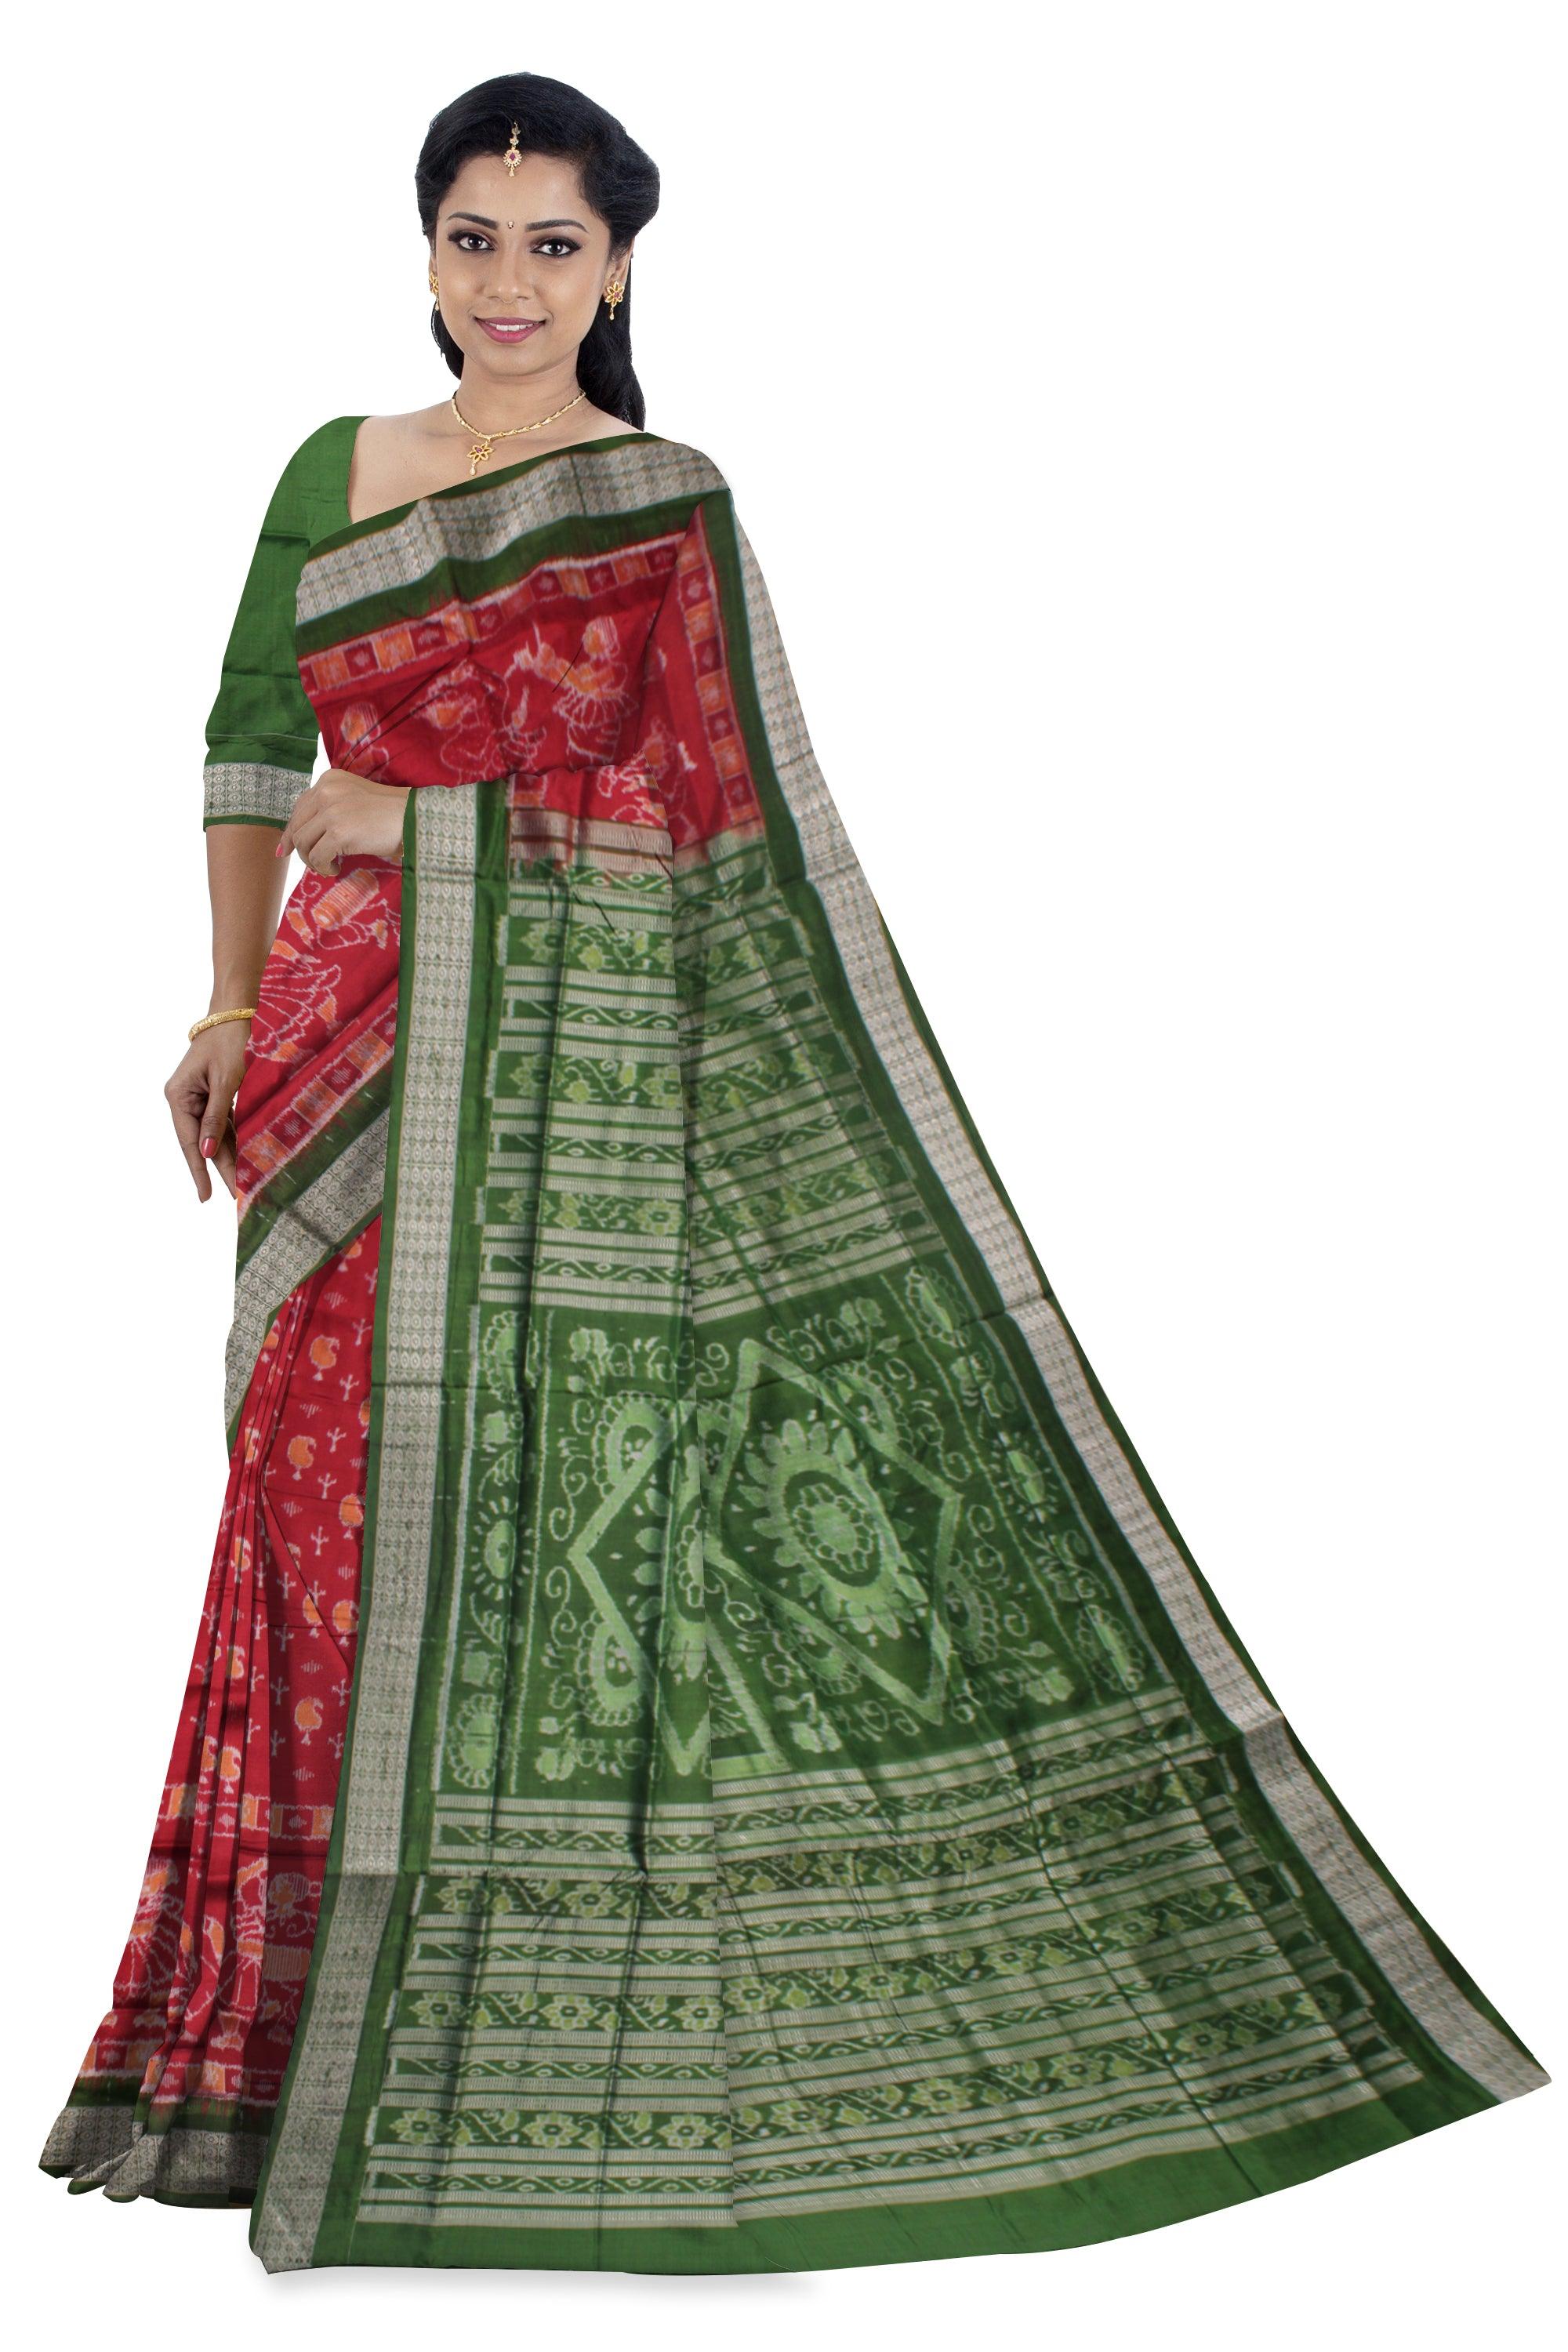 NARTAKI PATTERN PURE SILK SAREE IS MAROON AND GREEN COLOR BASE, ATTACHED WITH MATCHING BLOUSE PIECE. - Koshali Arts & Crafts Enterprise